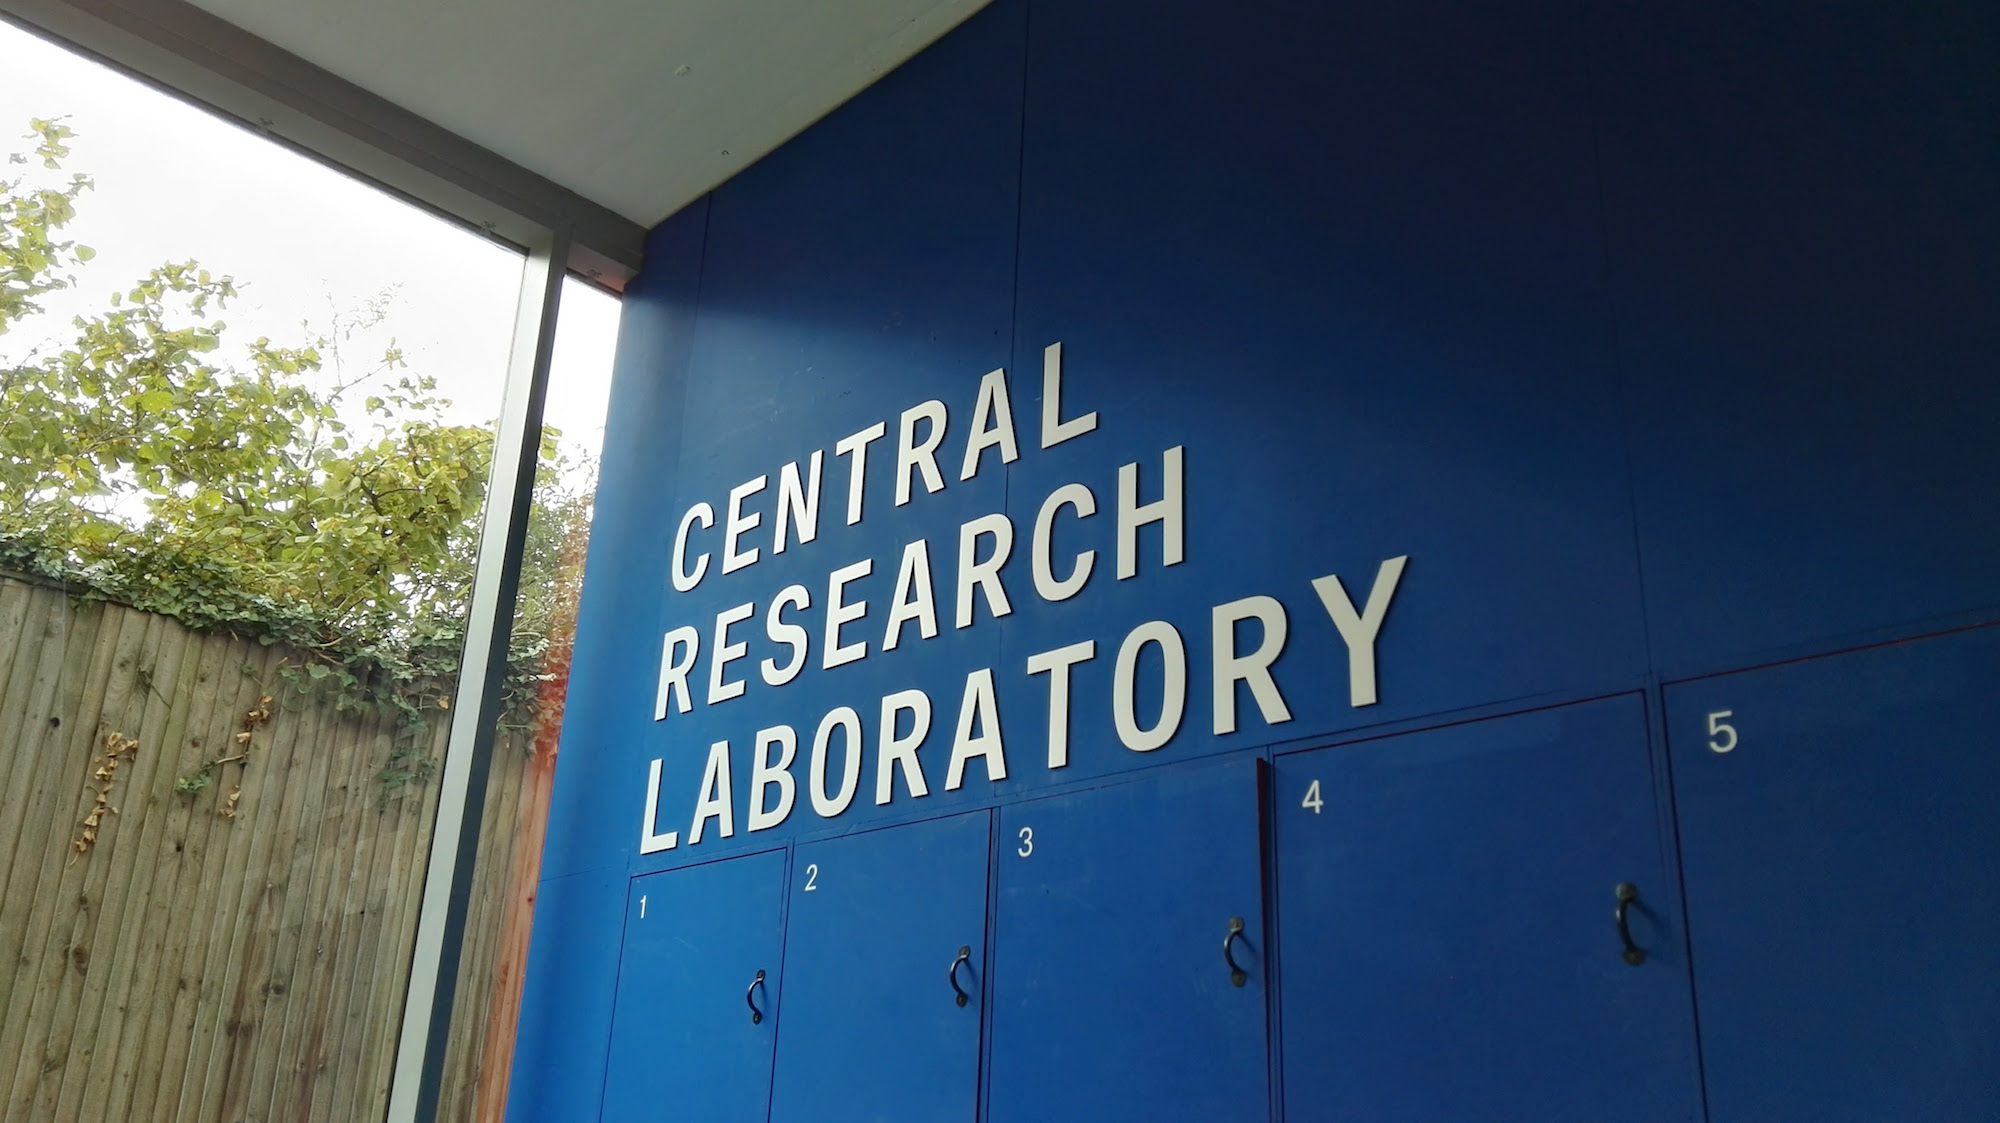 MEX Design Talk visits the Central Research Laboratory